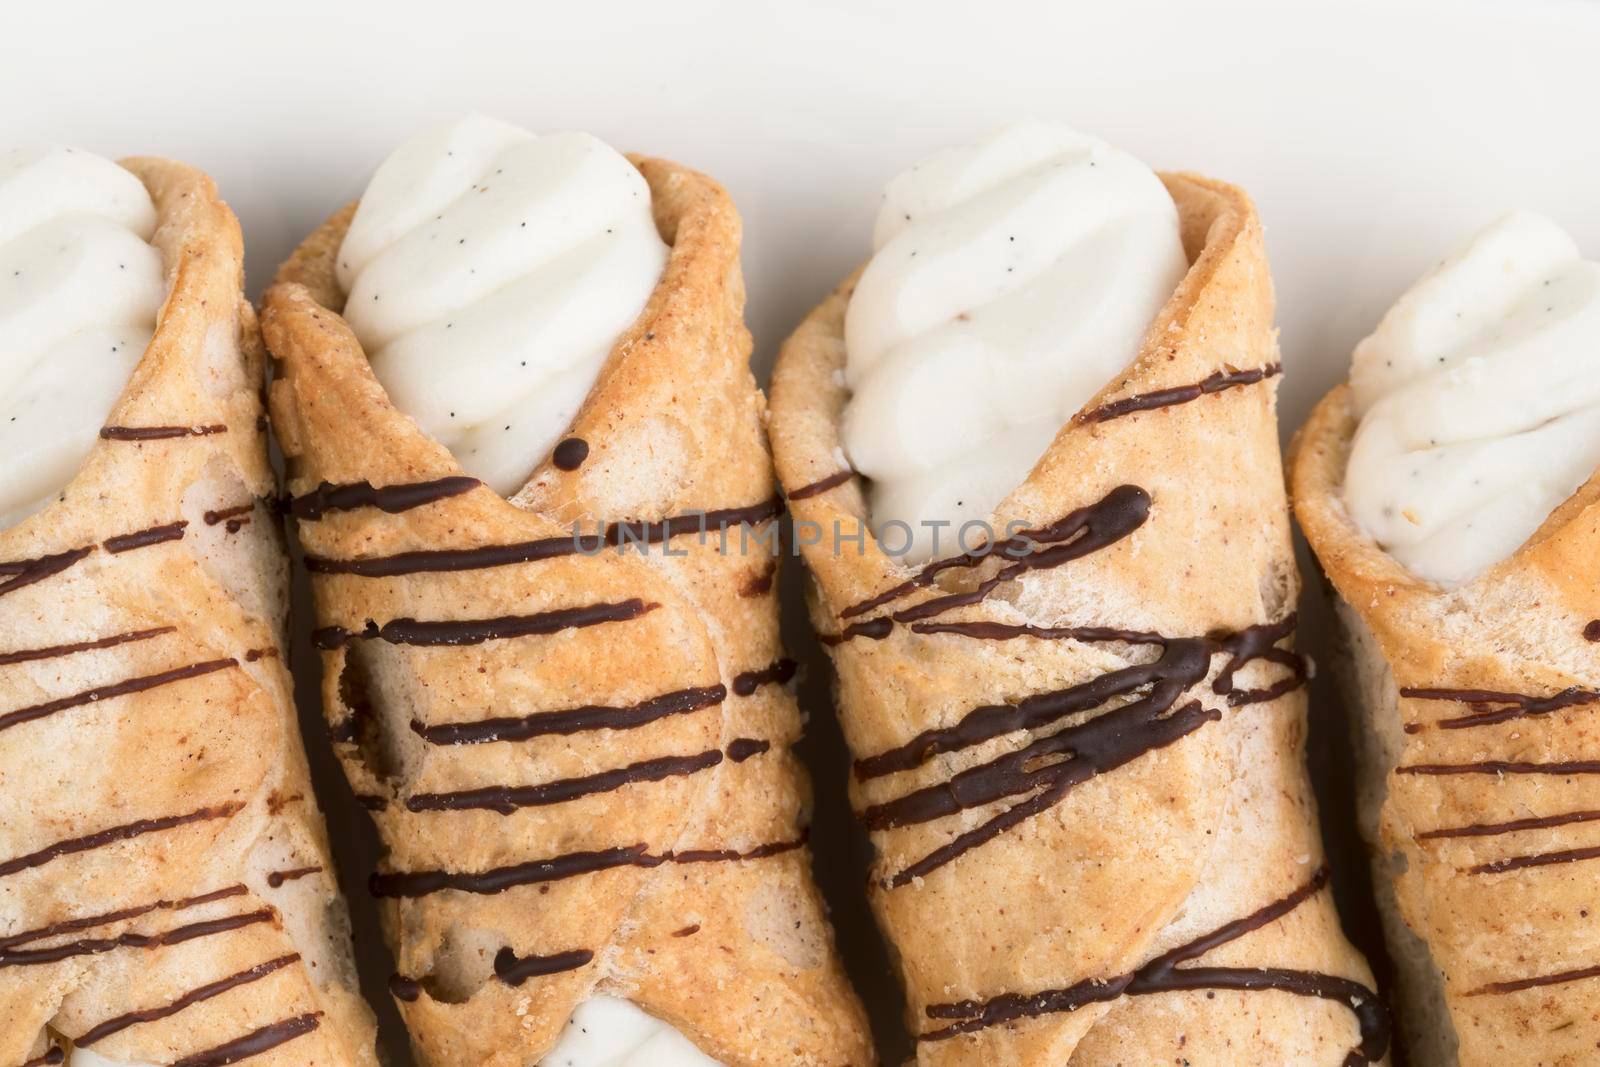 Close up of pastries stuffed with sweet cream and drizzled with chocolate, viewed from avove